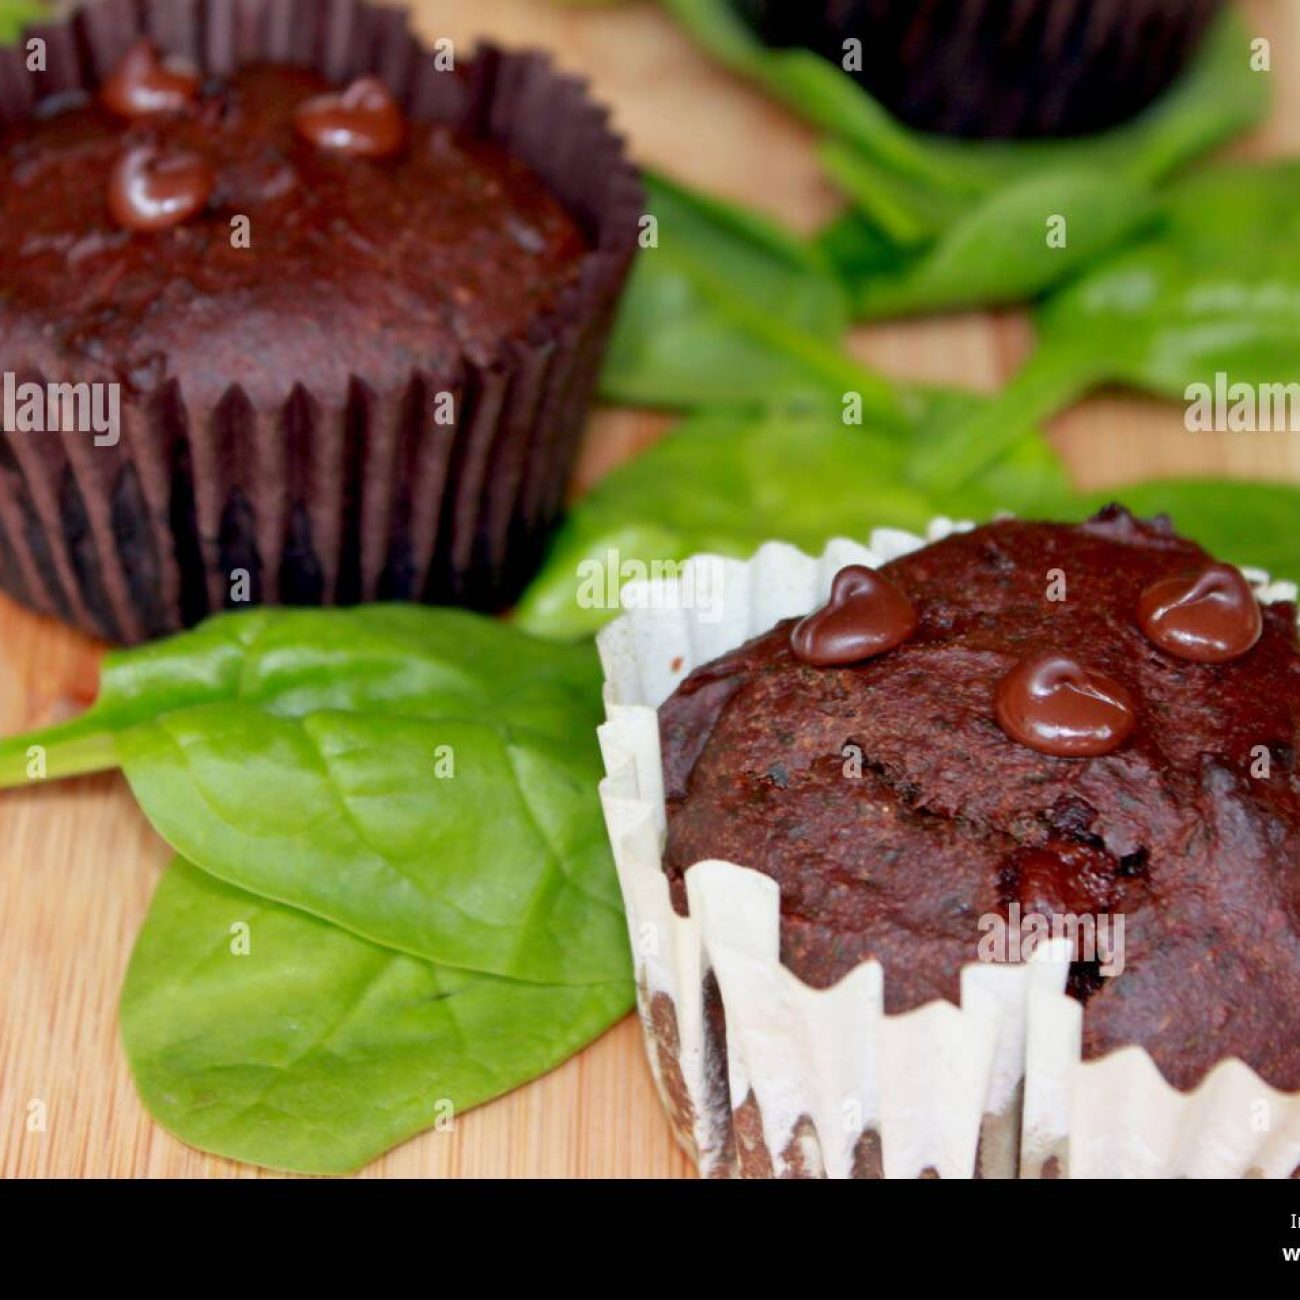 Chocolate Cupcakes With Spinach And